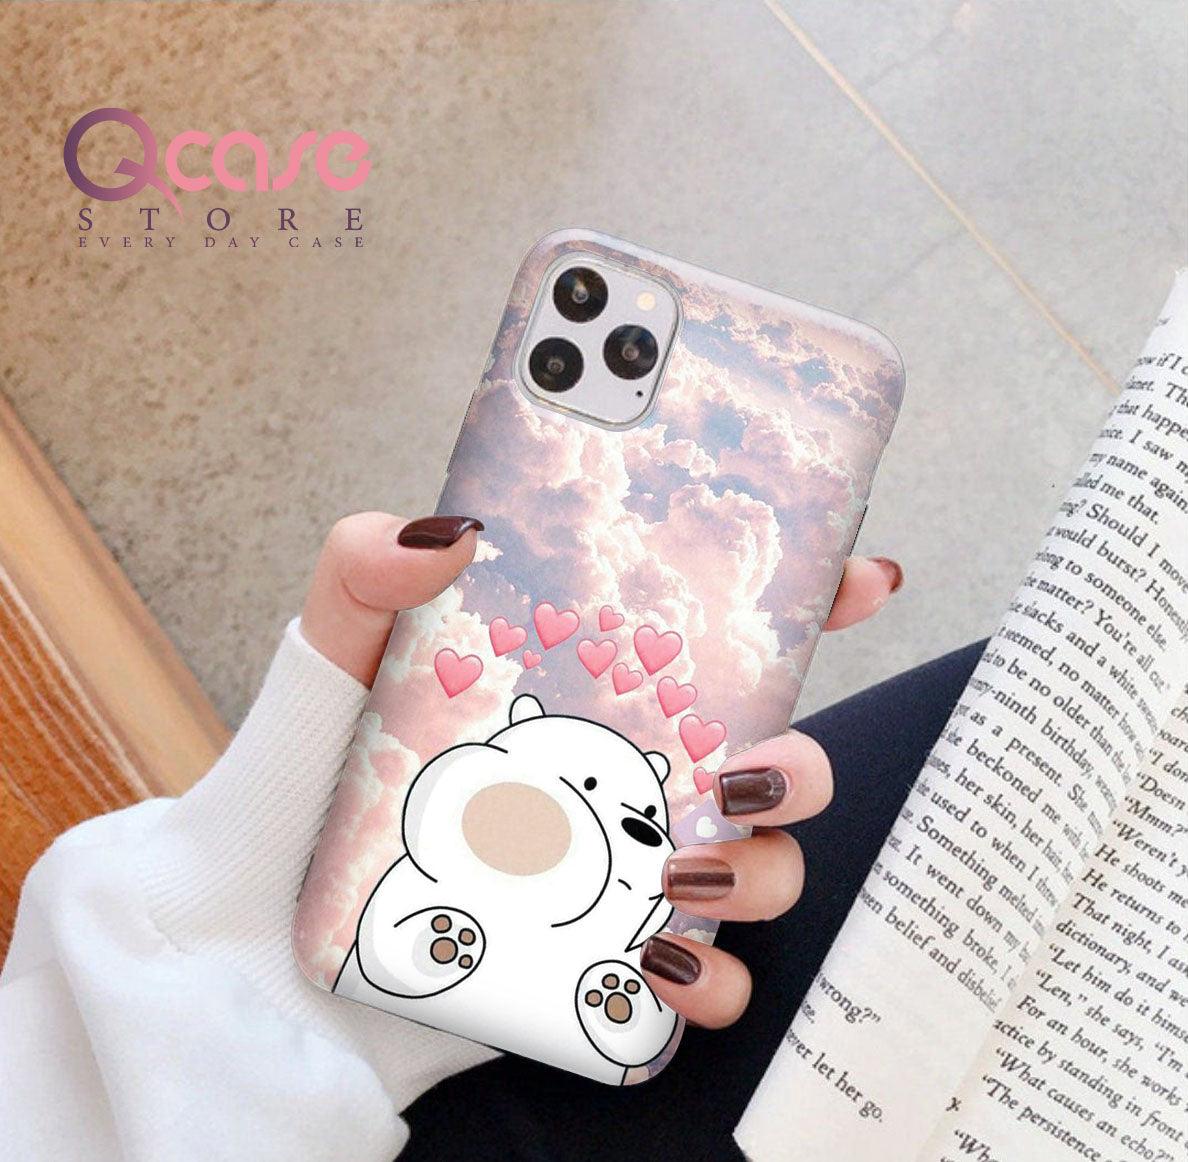 Ice Bear Phone Cover - Qcase Store | Everyday Case